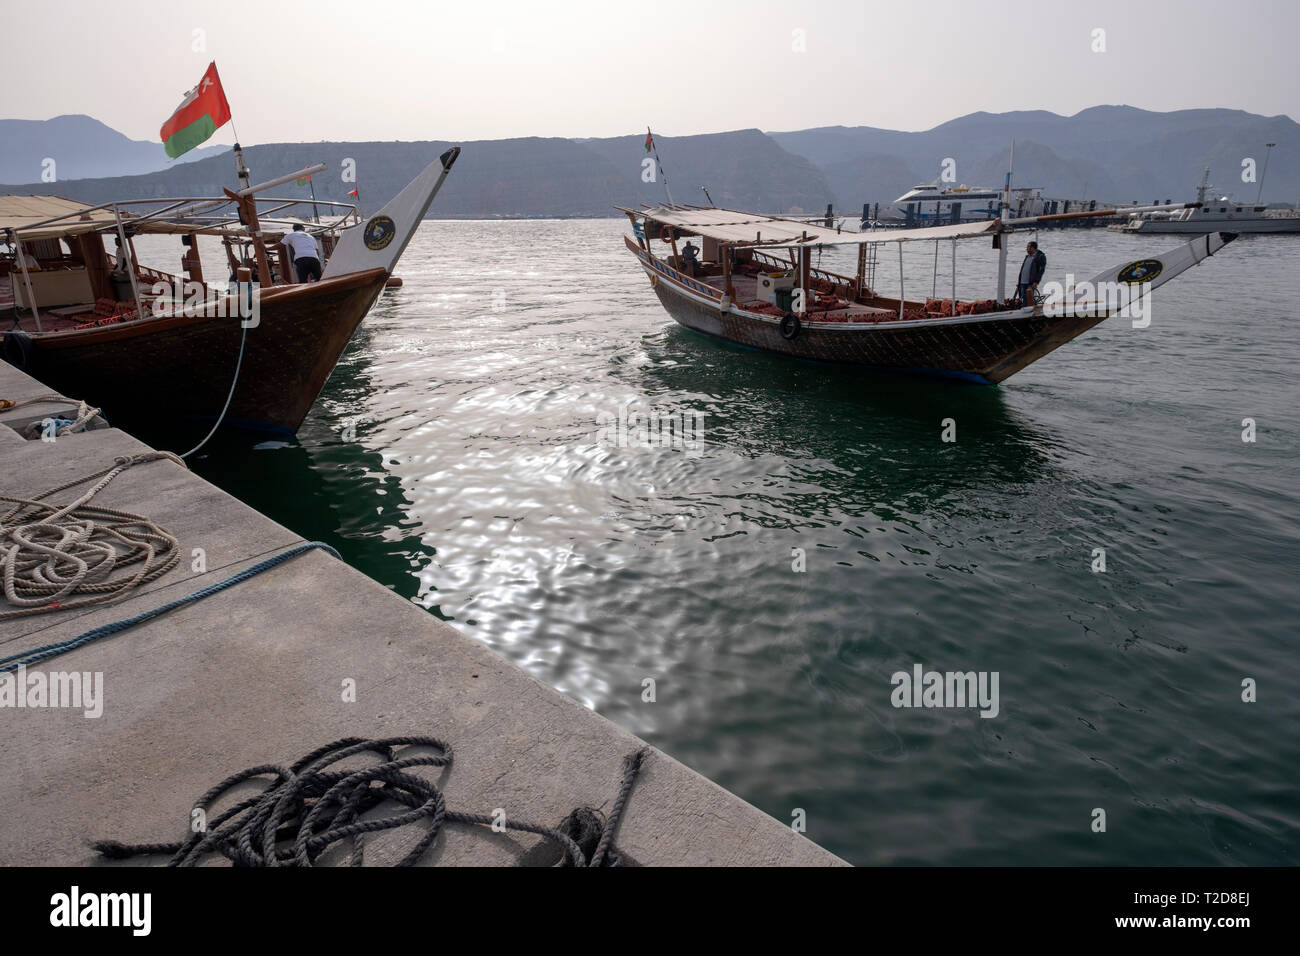 Cruise tour aboard a traditionally decorated arabian Dhow wooden boat along the rocky mountains of the Musandam peninsula in the Oman Fjords Stock Photo